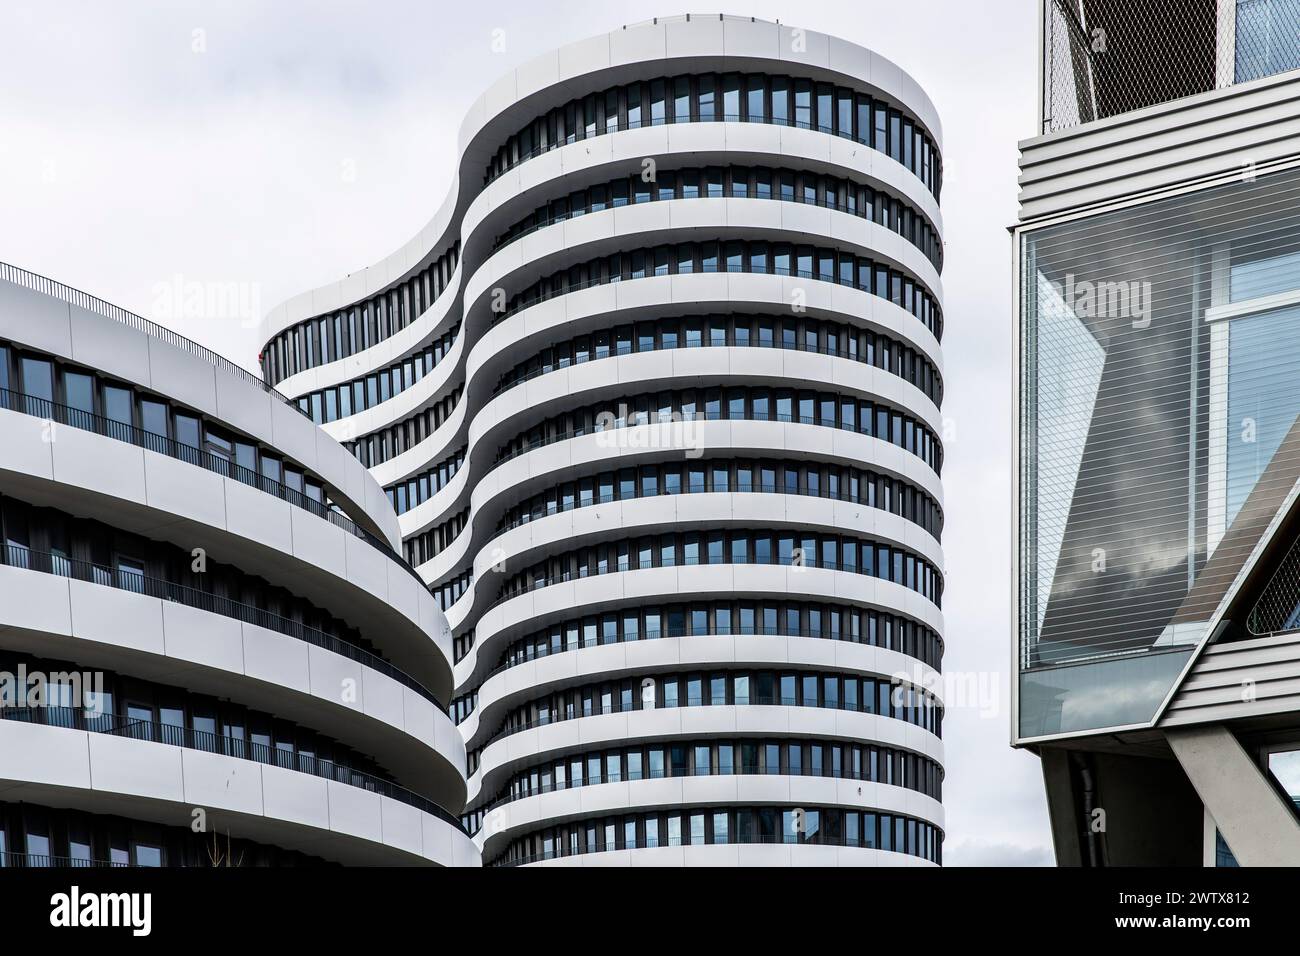 the 16-storey tower 'Alto' of the Office Campus 'myHive' at the Medienhafen (media harbor) Duesseldorf, Germany. der 16 geschossige Turm 'Alto' des Of Stock Photo